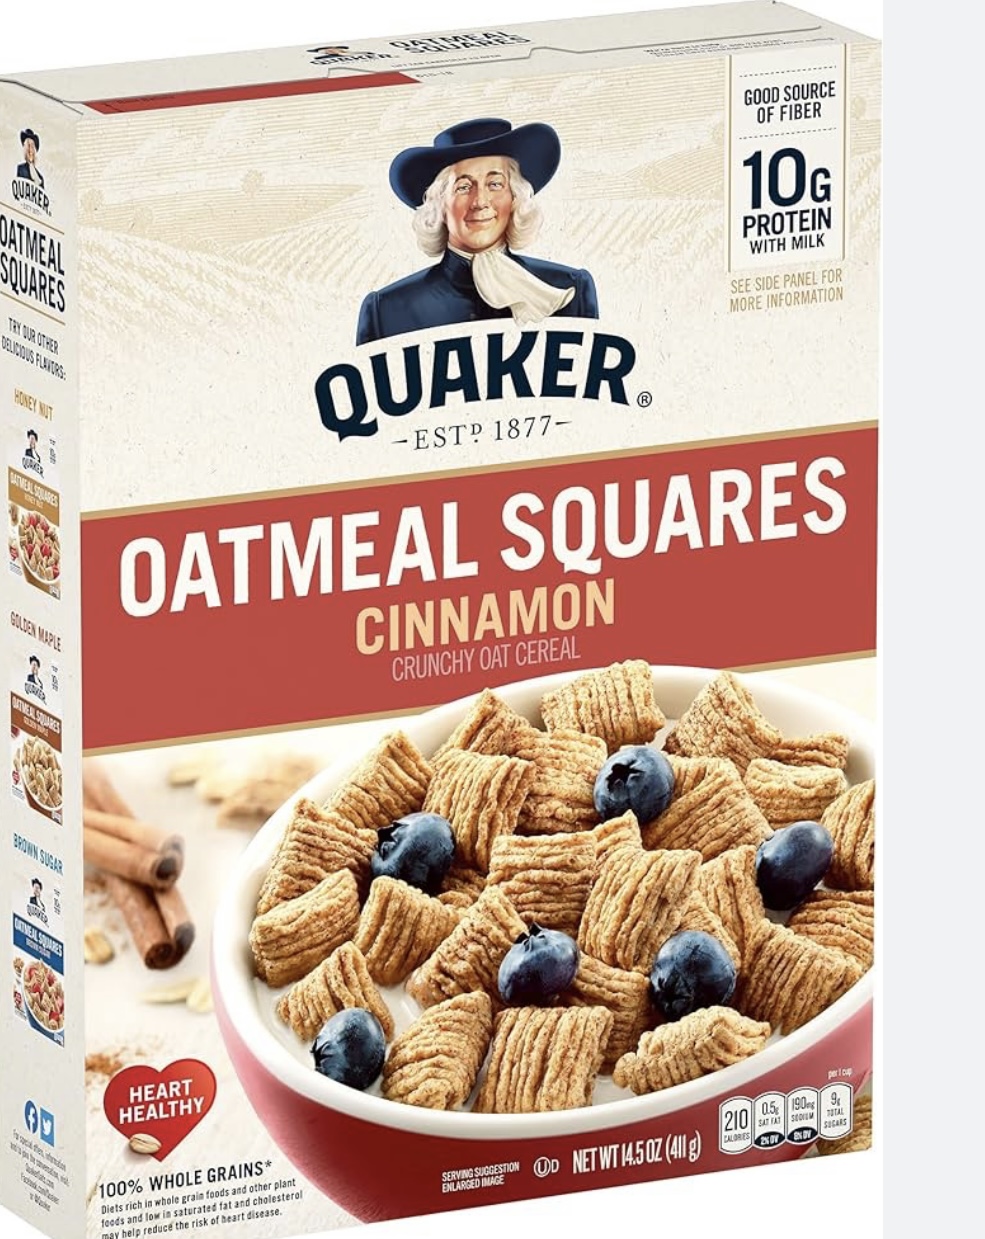 Quaker issues revised recall notice with additional products due to